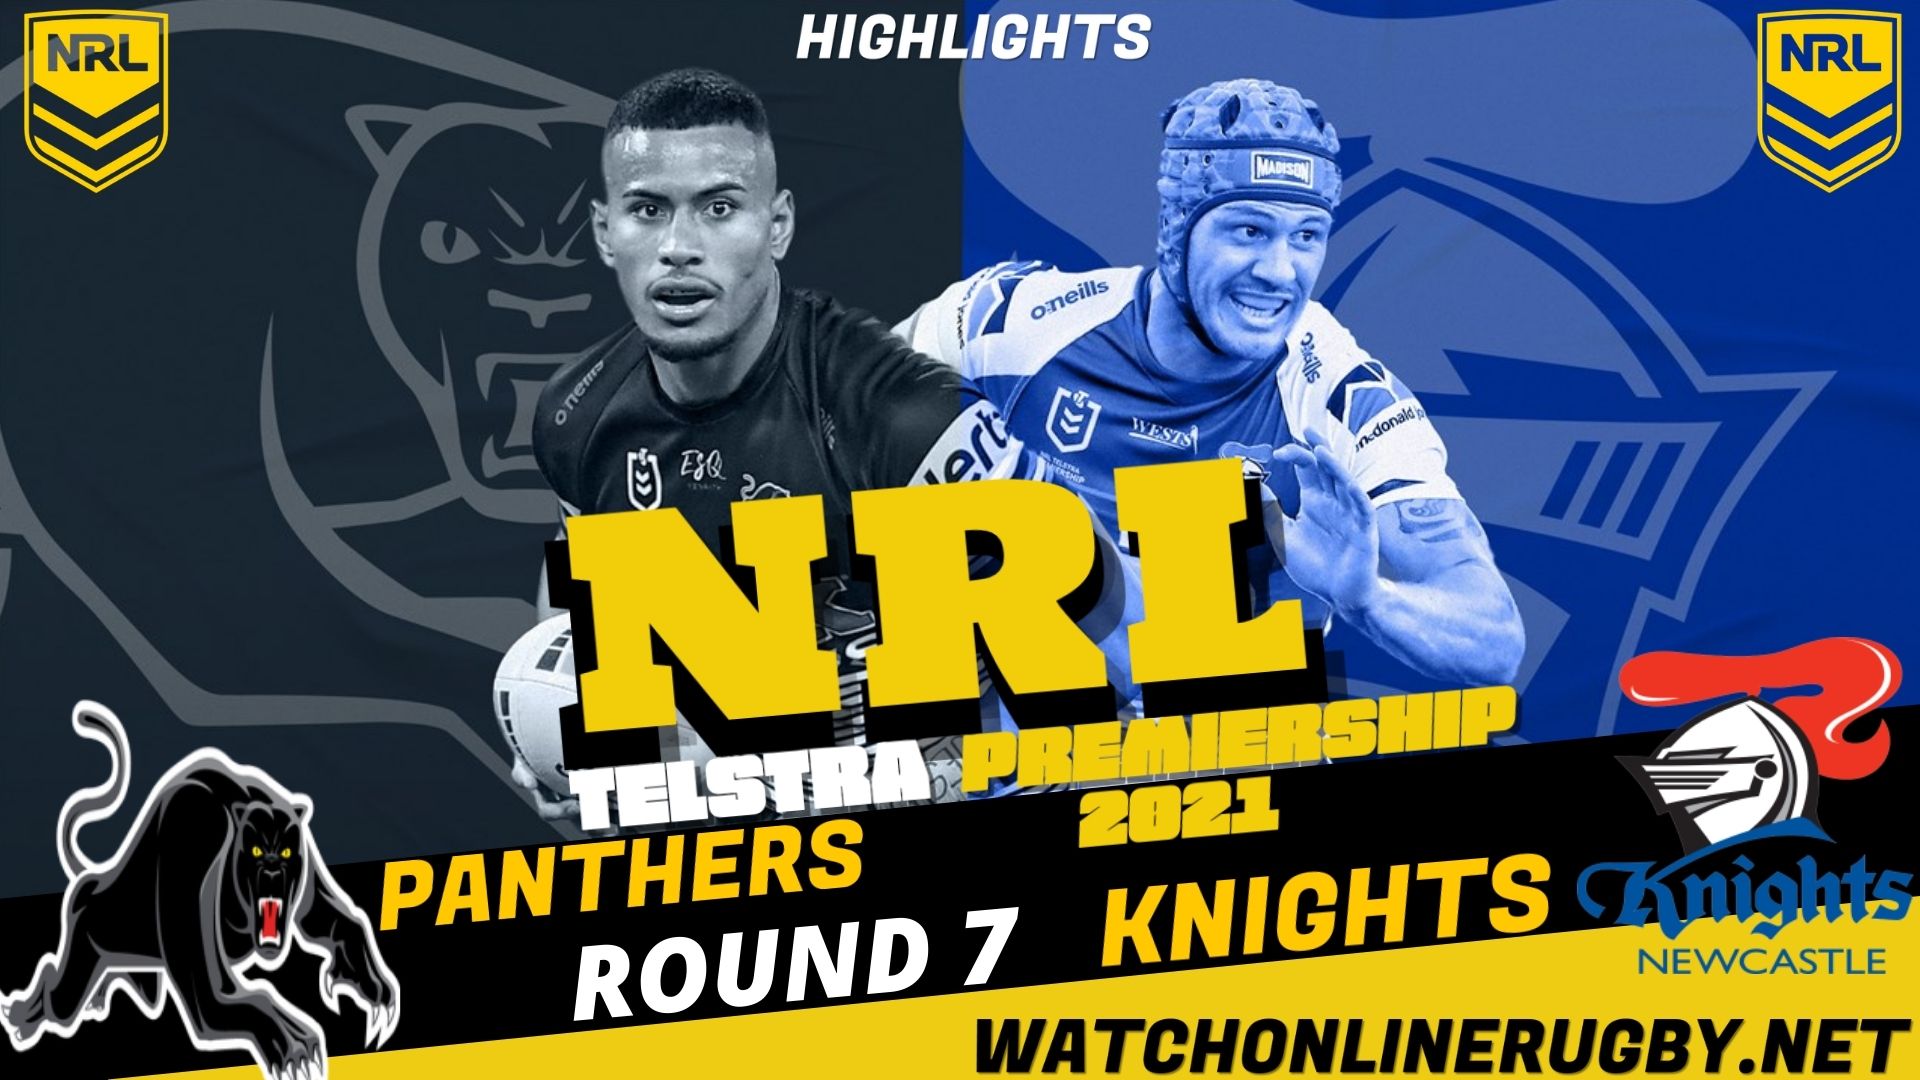 Panthers Vs Knights Highlights RD 7 NRL Rugby